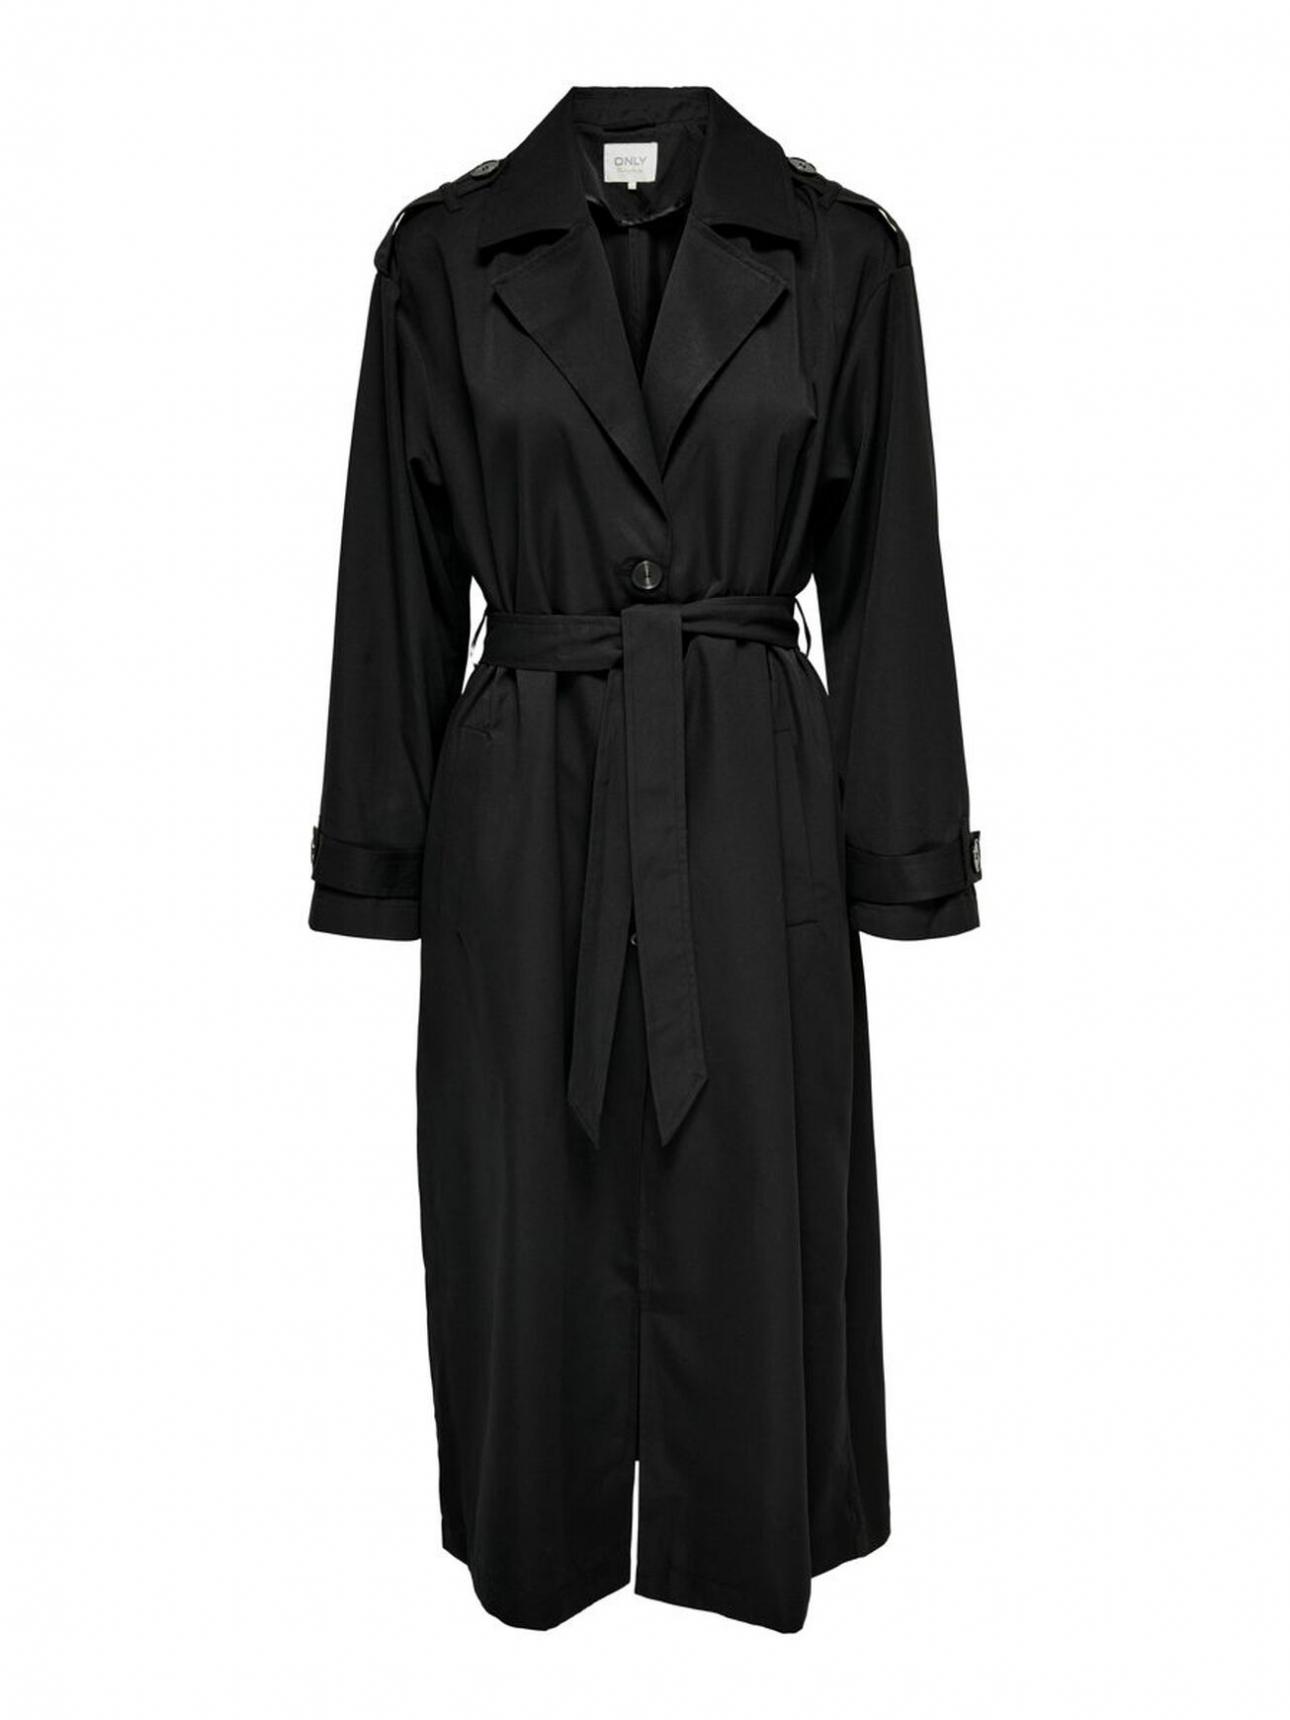 Dame ONLY Petite & Tall TALL X-TRA LANG TRENCHCOAT Black · Whittier Lock And